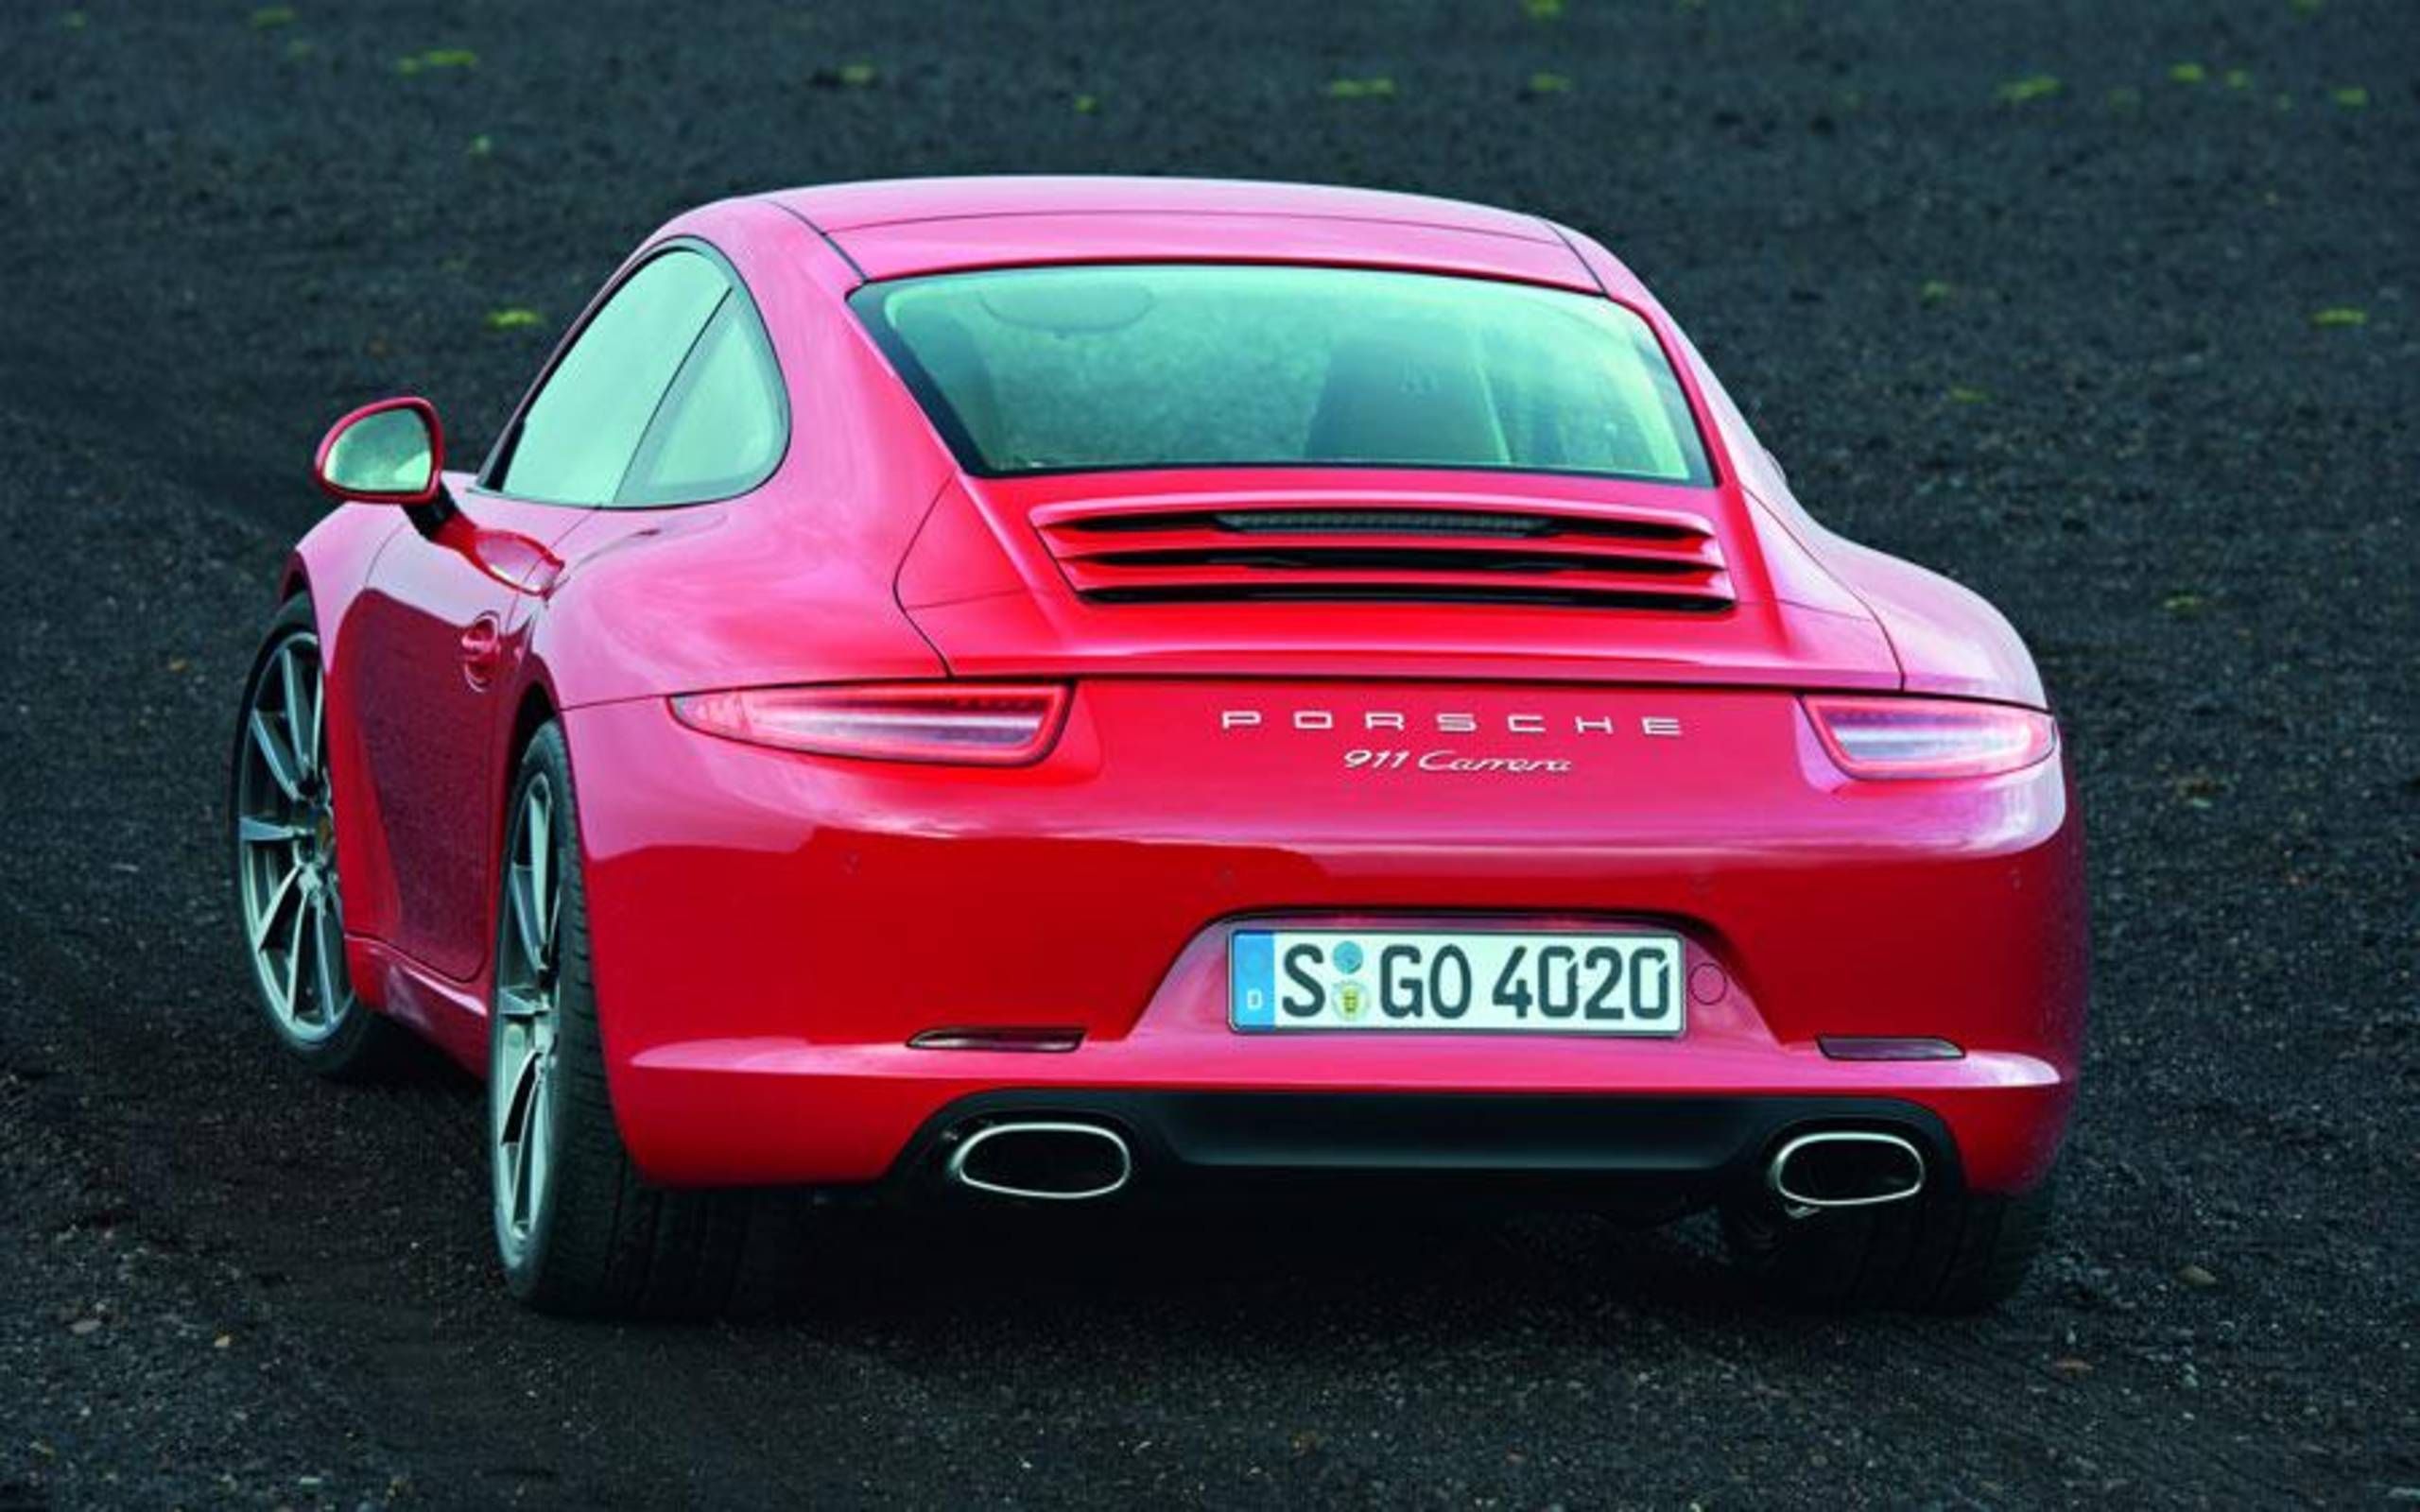 2012 Porsche 911 Carrera review notes: All the car you'll ever need